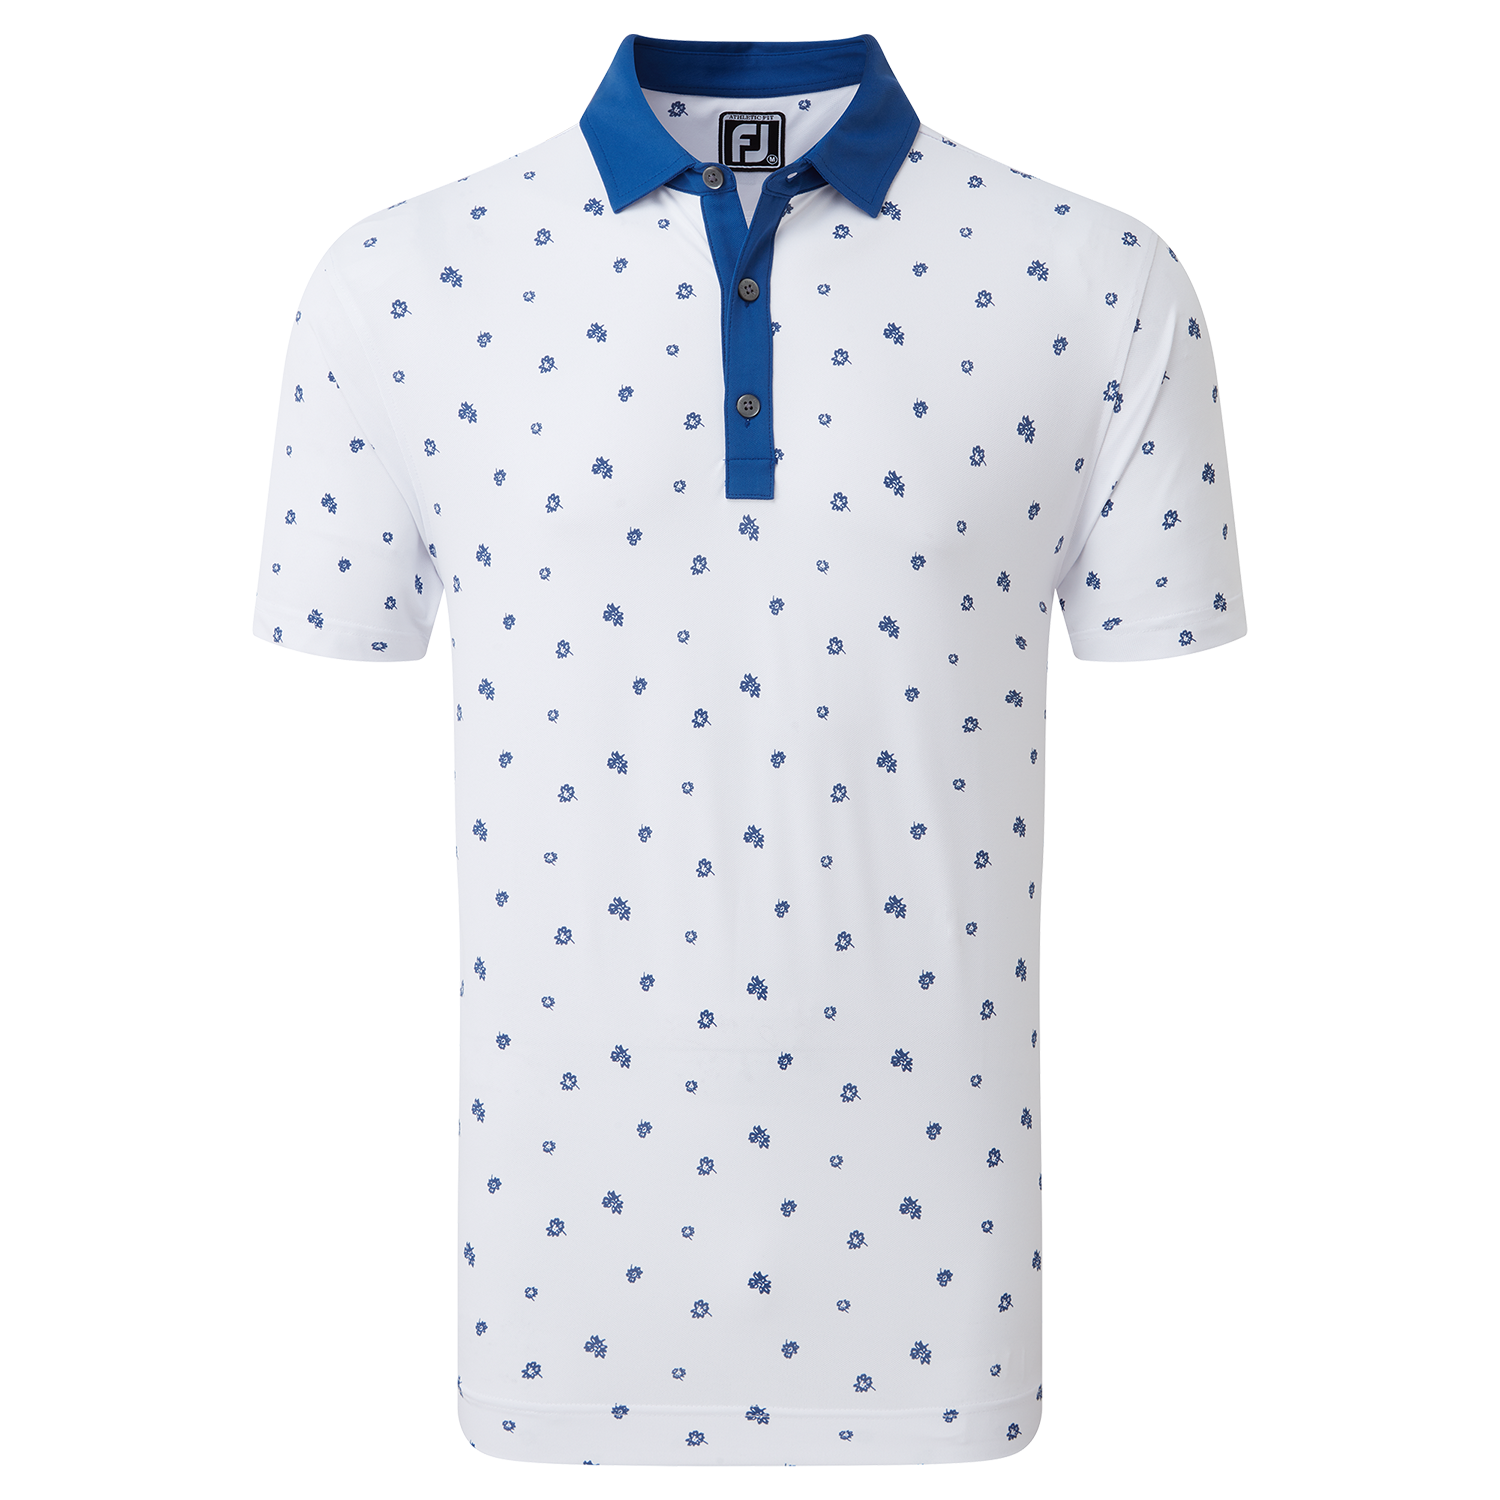 FootJoy Scattered Floral Polo Shirt White/Twilight 80043 | Scottsdale Golf